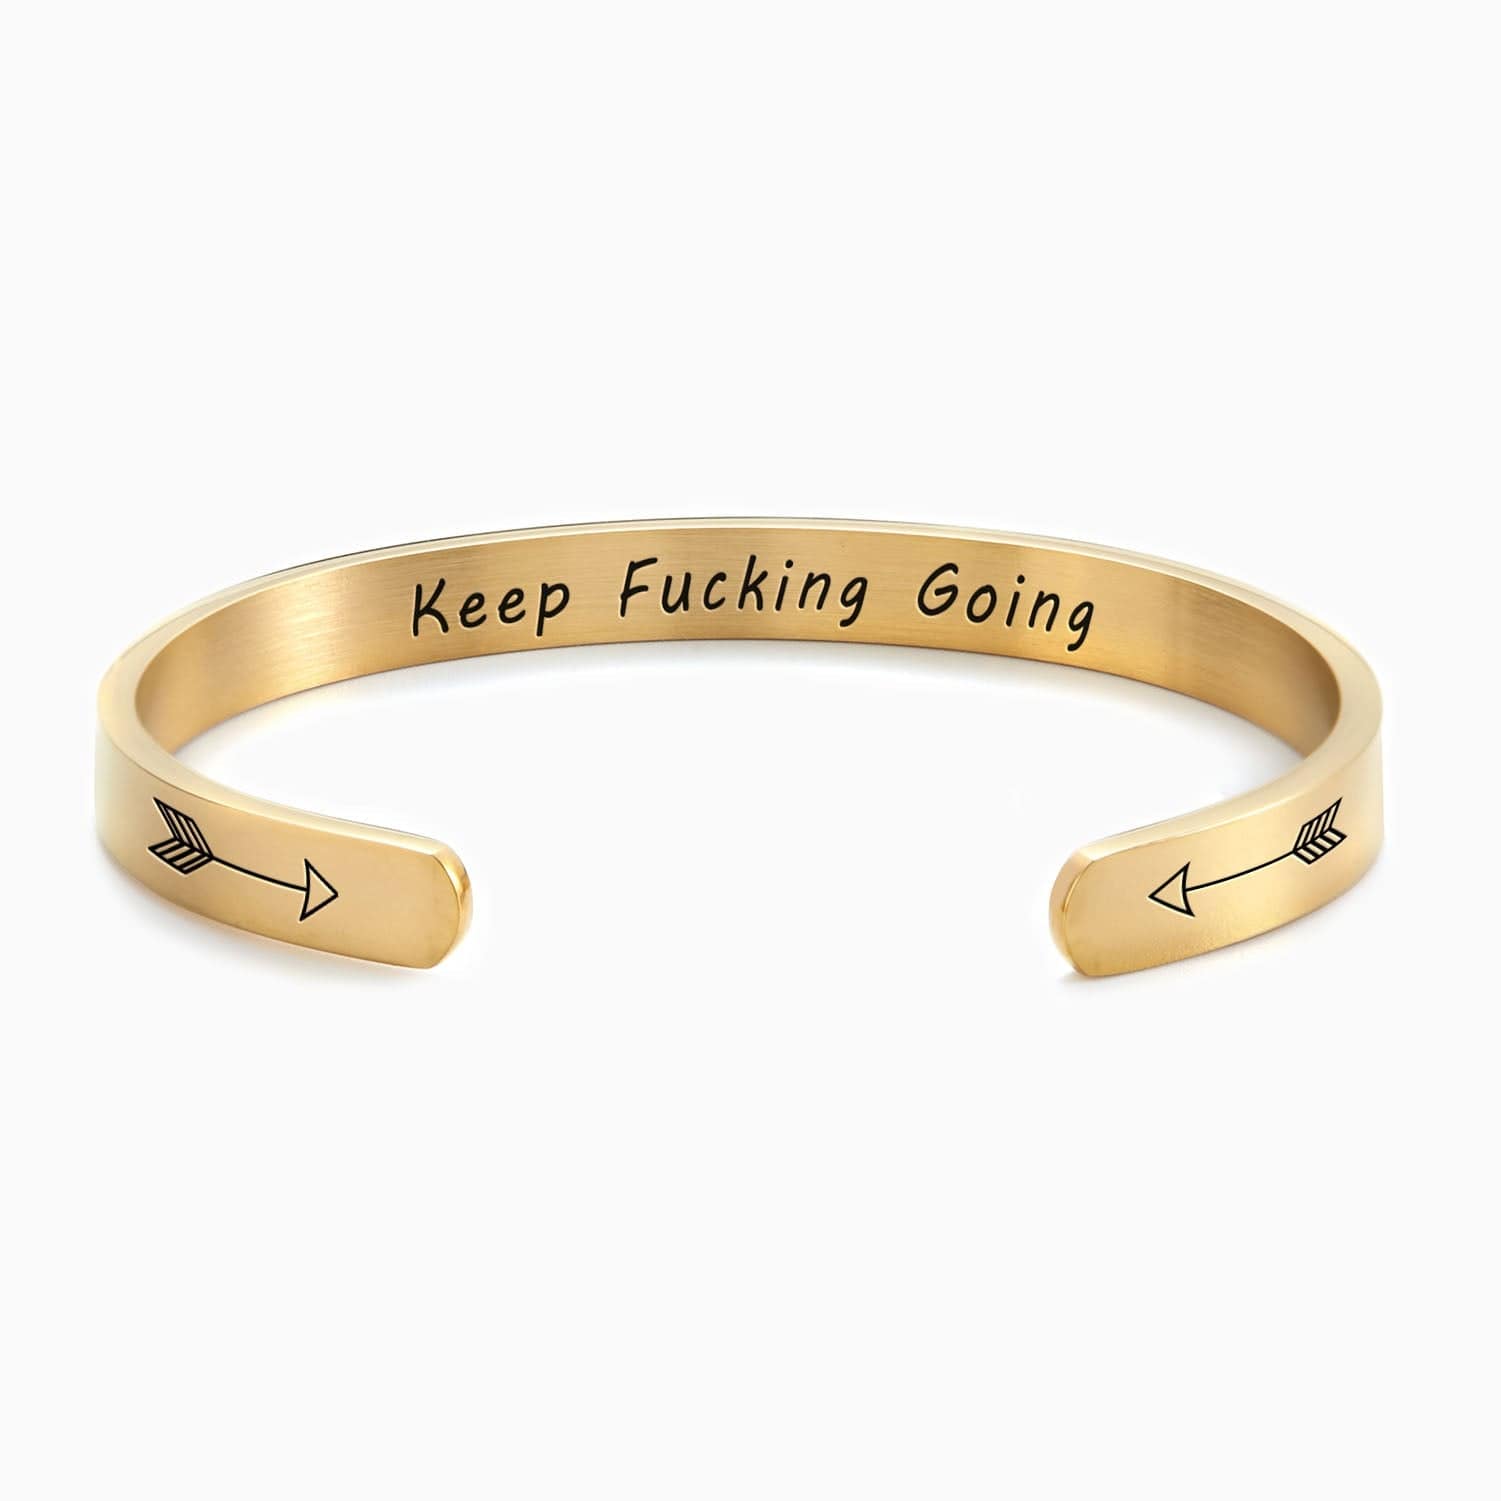 Keep Fucking Going Personalizable Cuff Bracelet 18k Gold Plated Bracelet For Woman MelodyNecklace